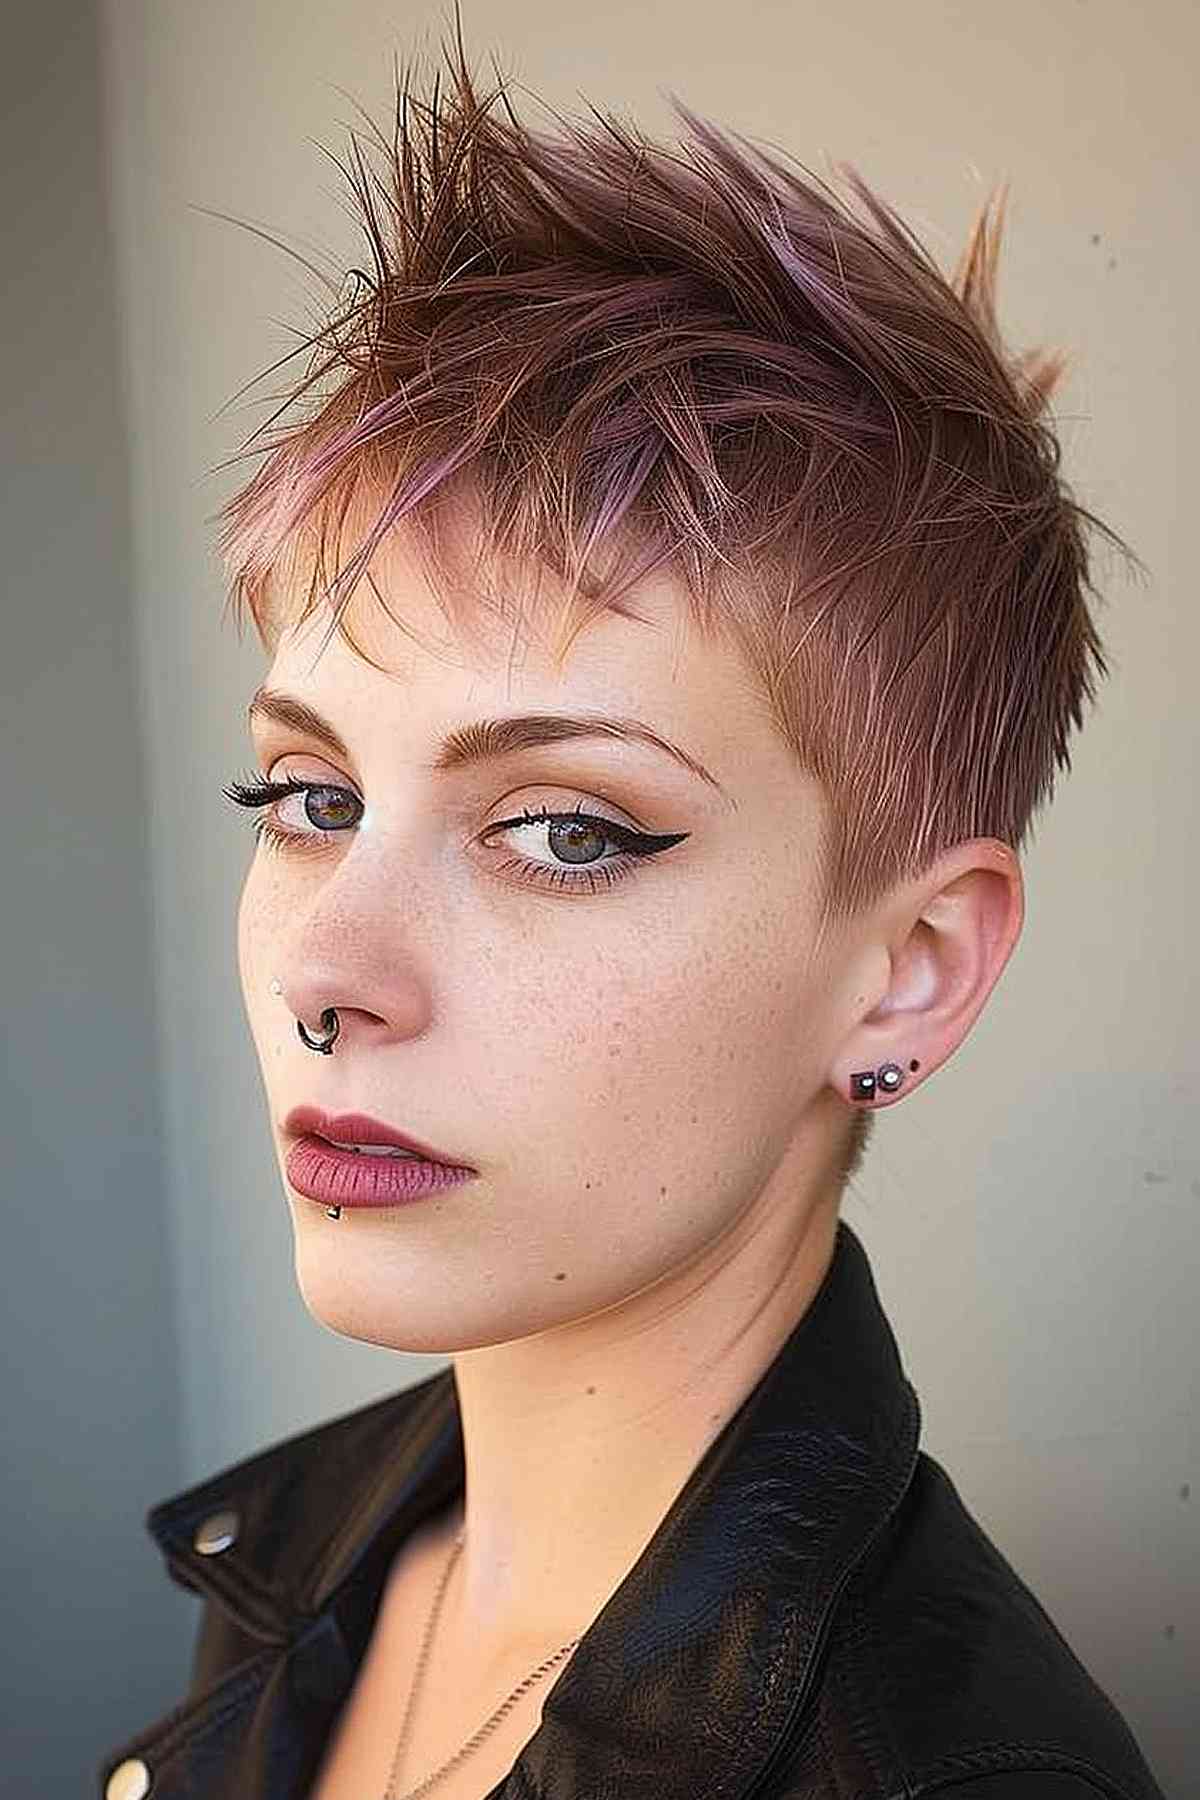 Alternative pixie cut with short, choppy layers and subtle purple highlights on a natural brown base, perfect for an edgy yet manageable look.